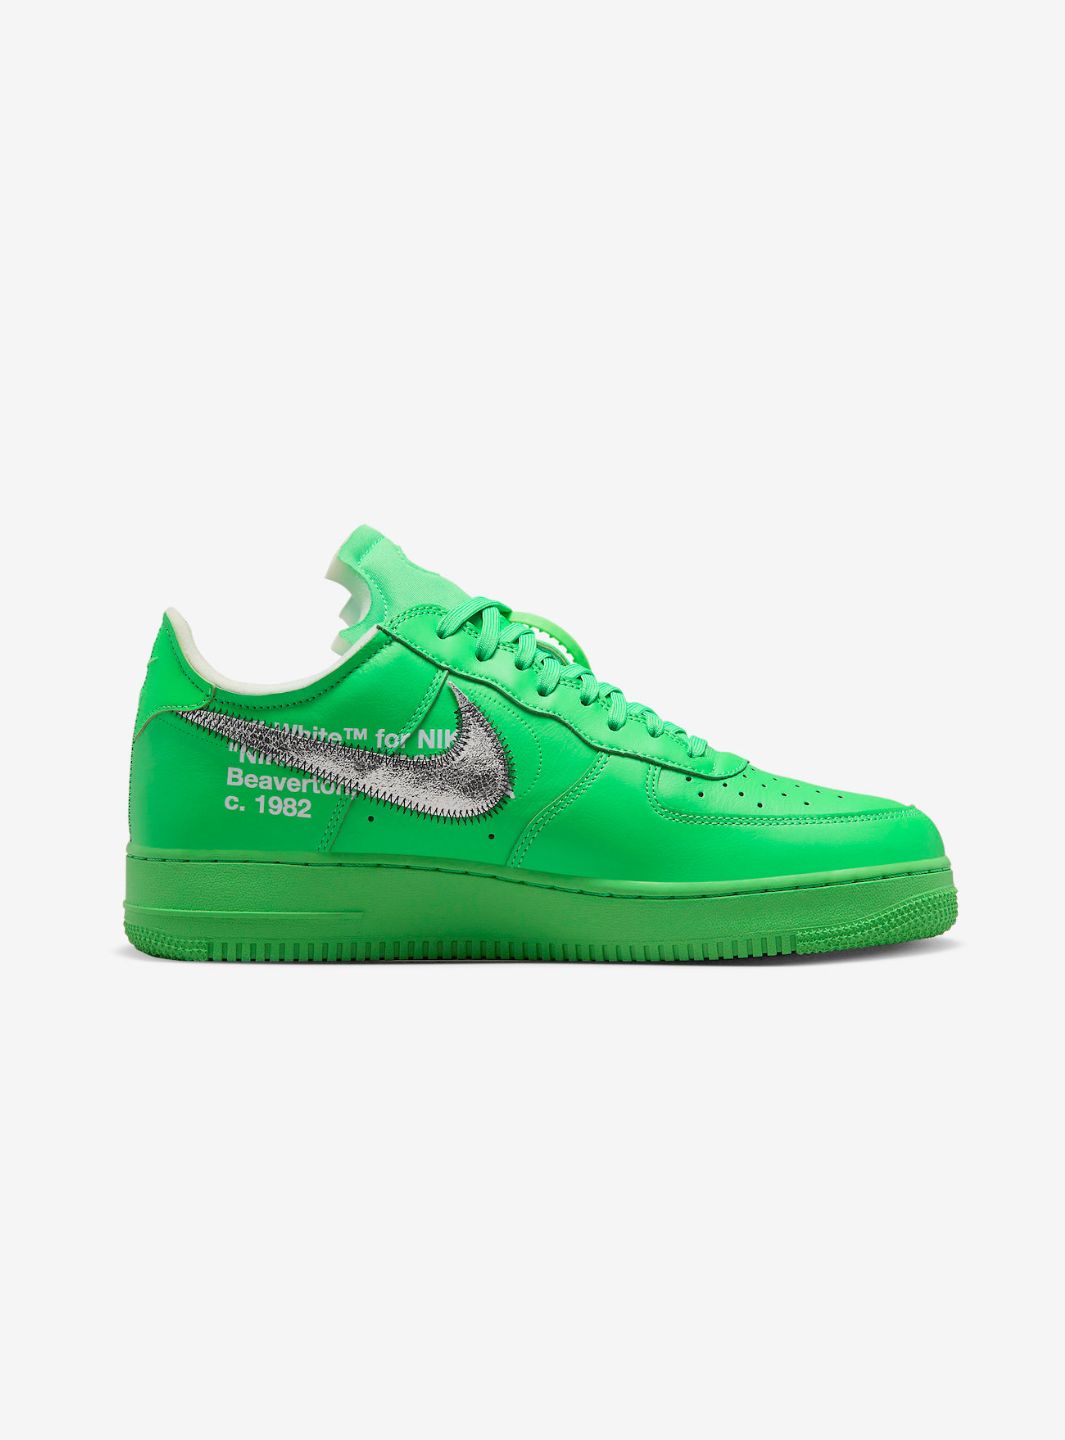 Nike Air Force 1 Low Off-White Brooklyn - DX1419-300 | ResellZone